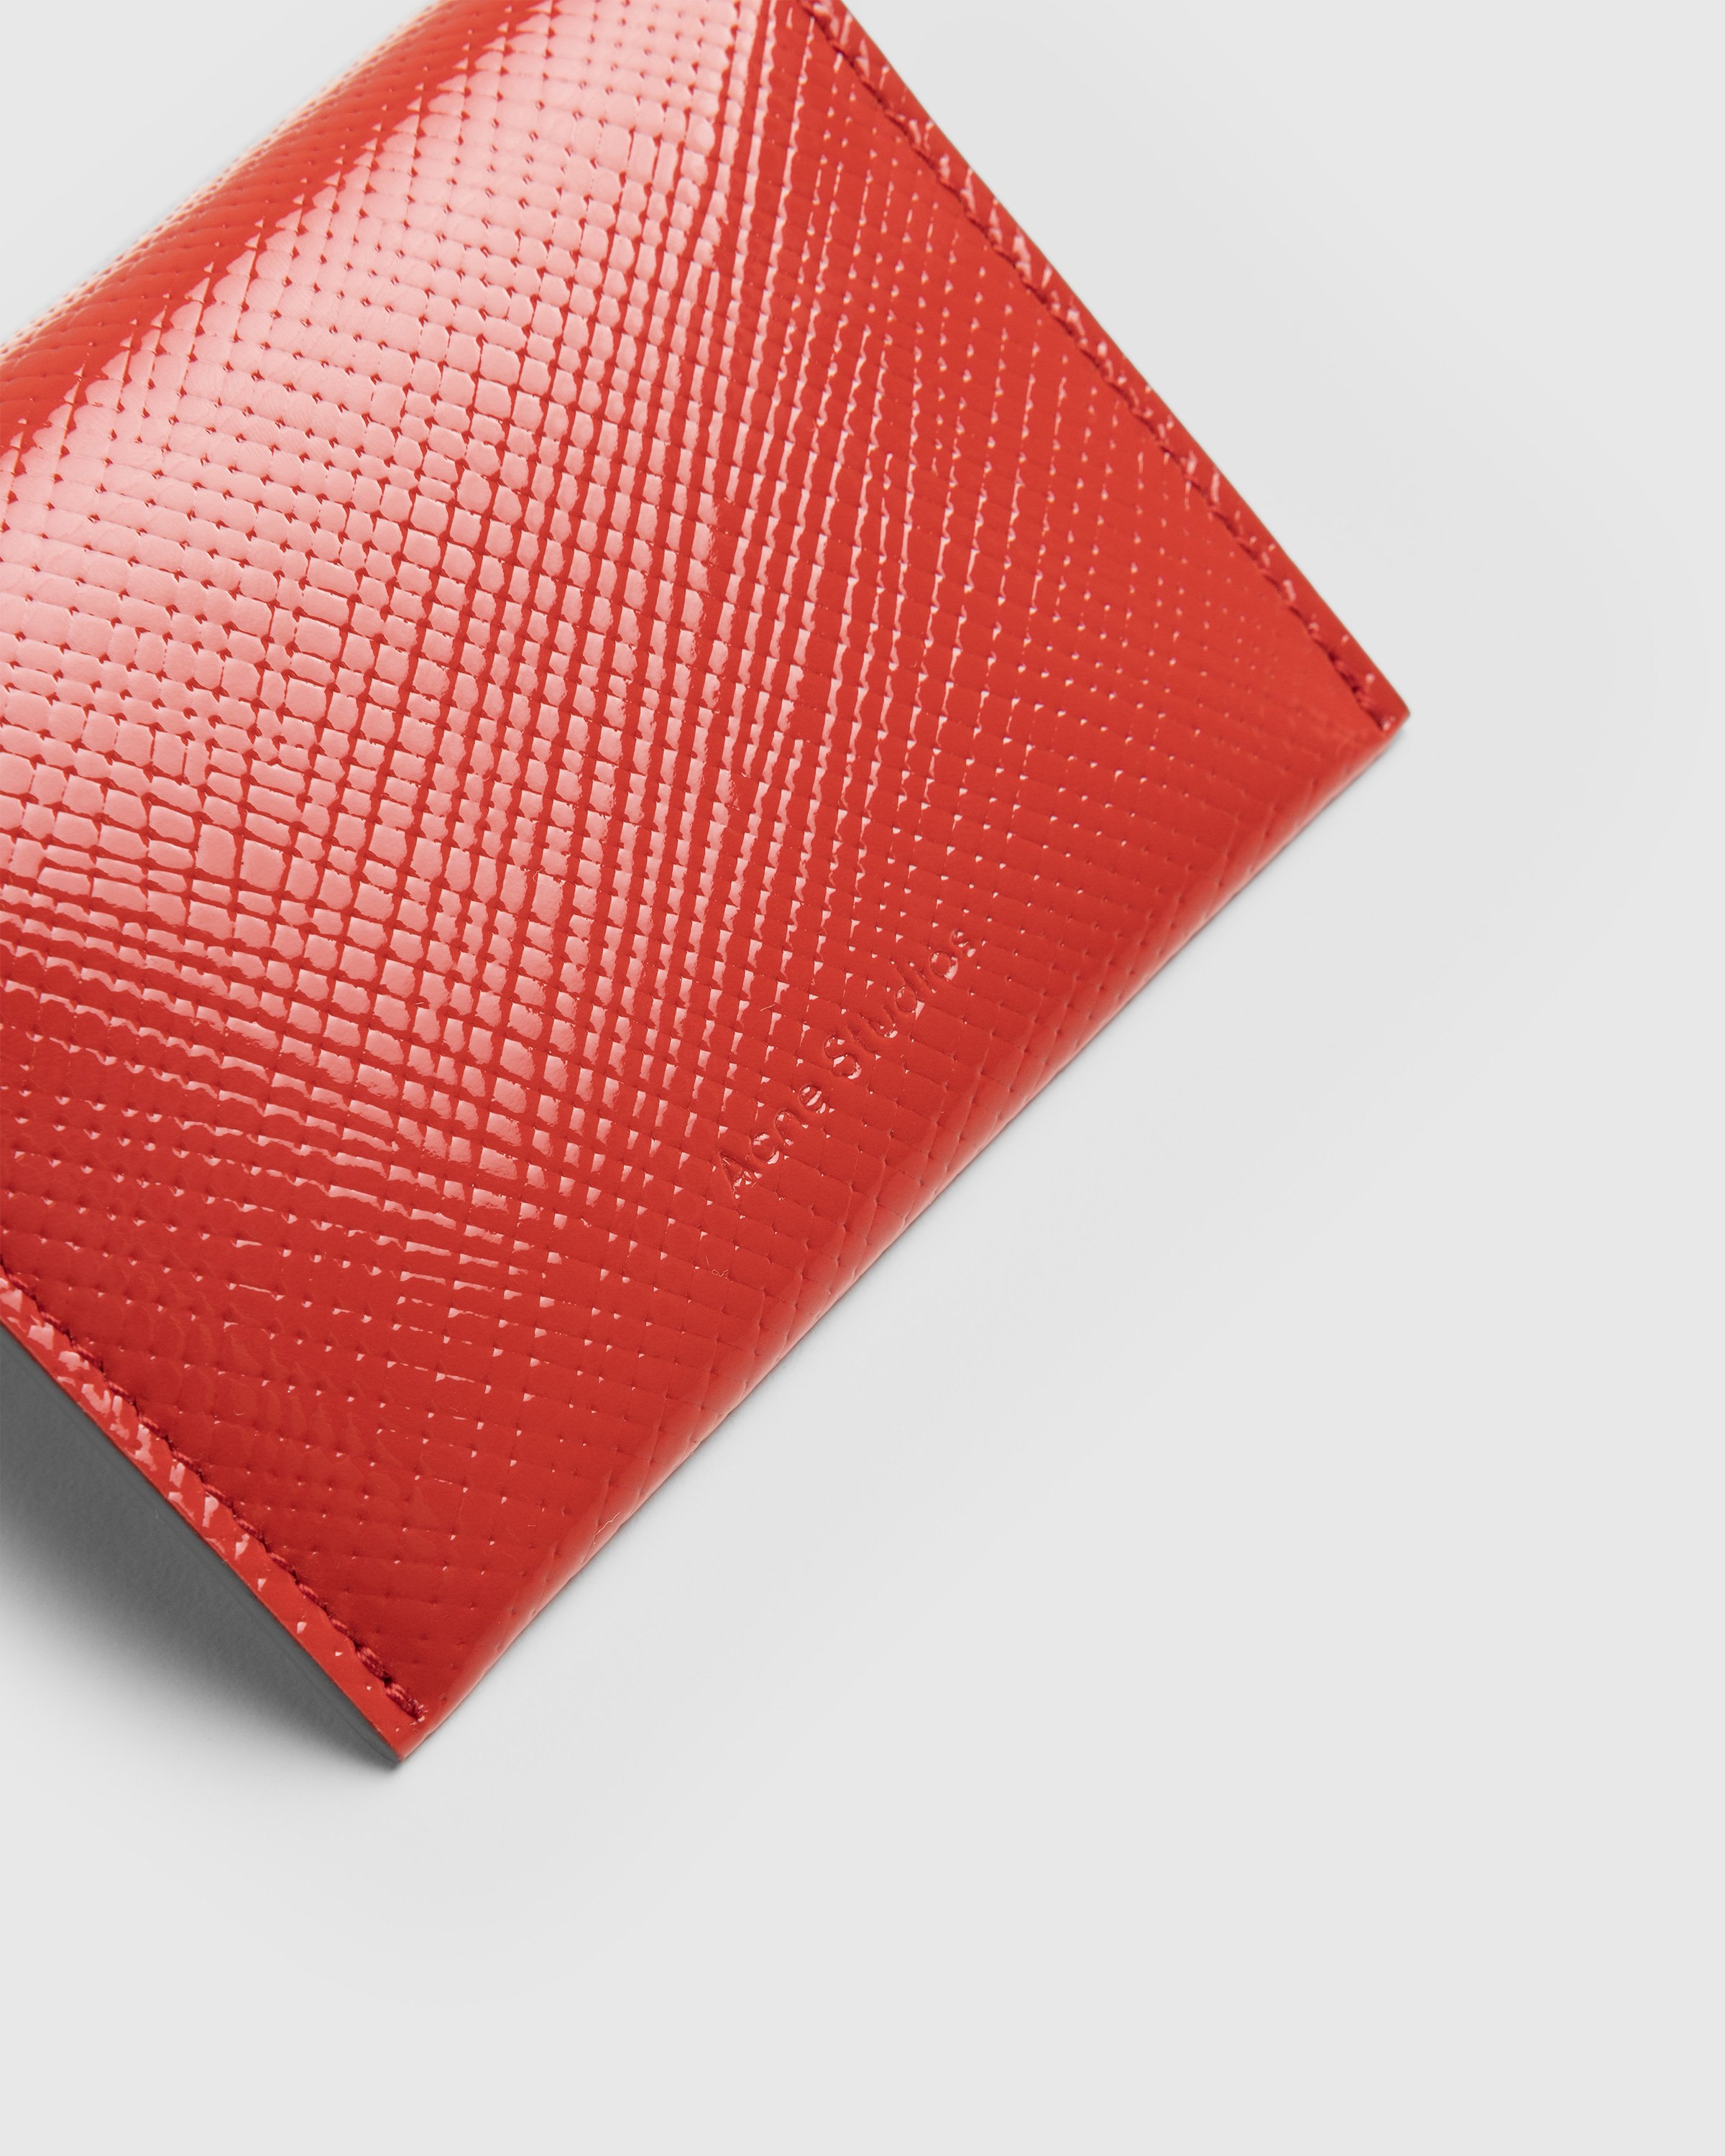 Acne Studios - Folded Card Holder Red - Accessories - Red - Image 4